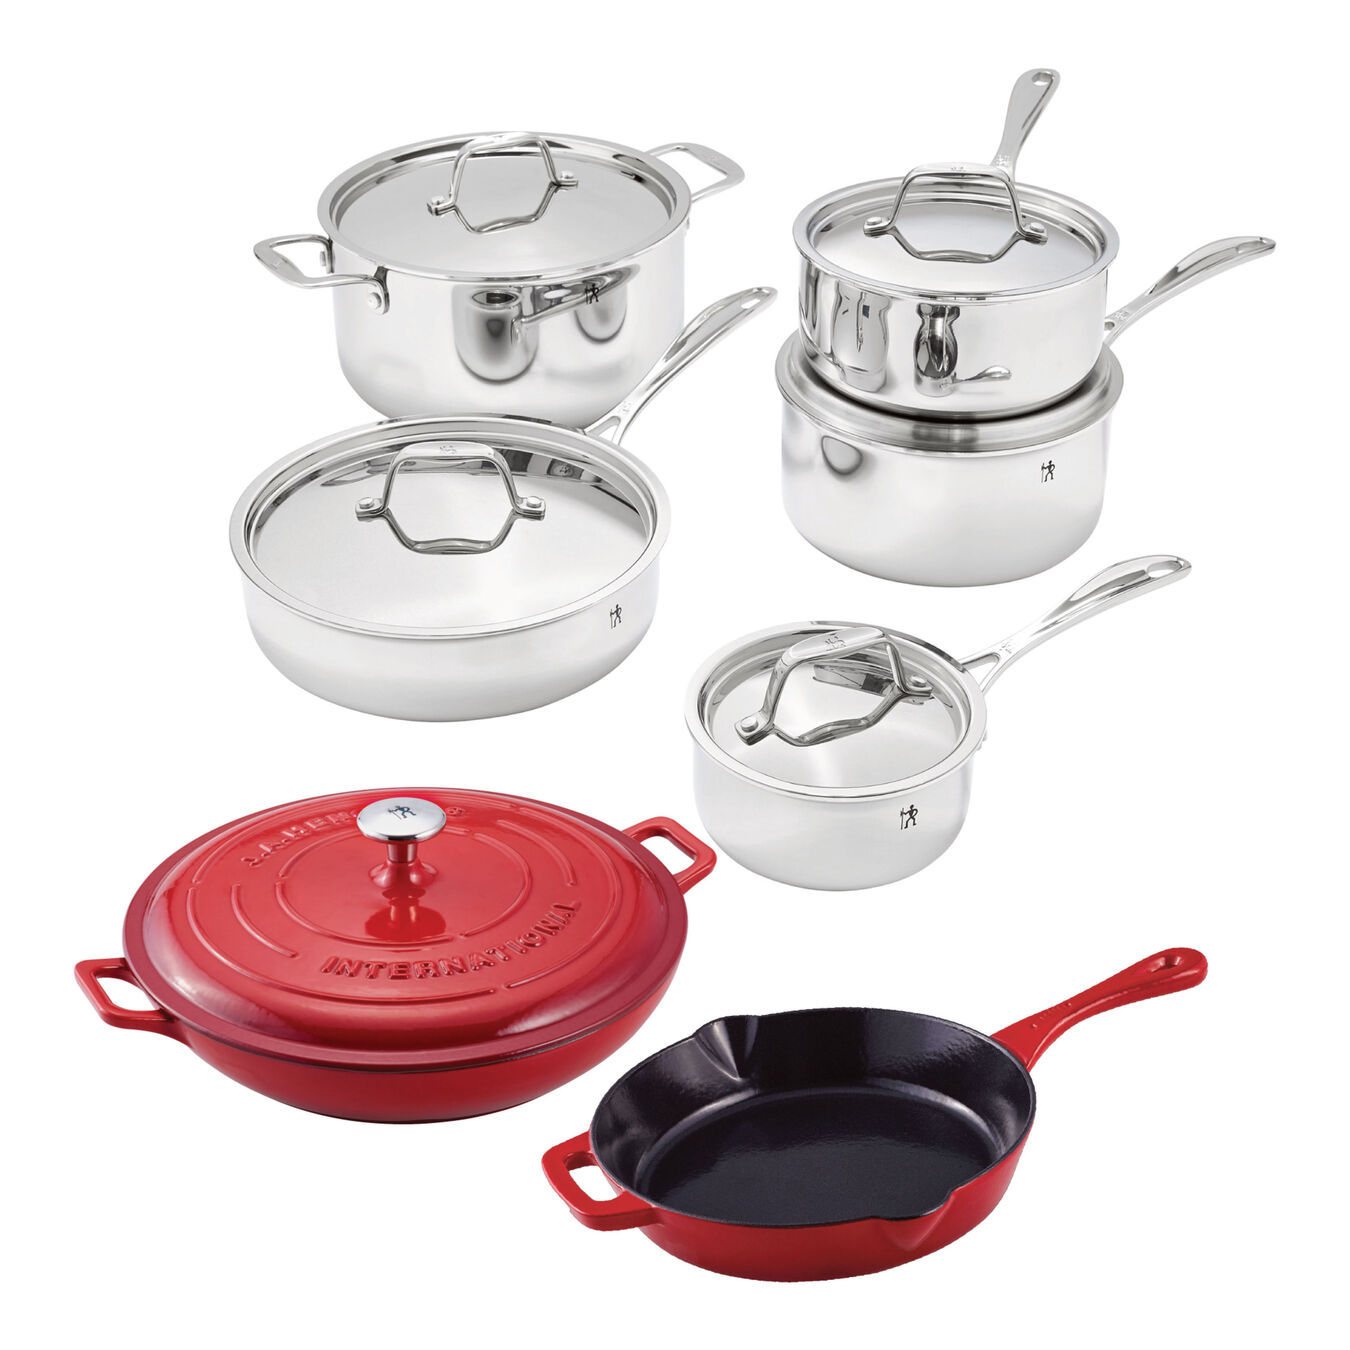 Pot set 13 Piece, 18/10 Stainless Steel,,large 1